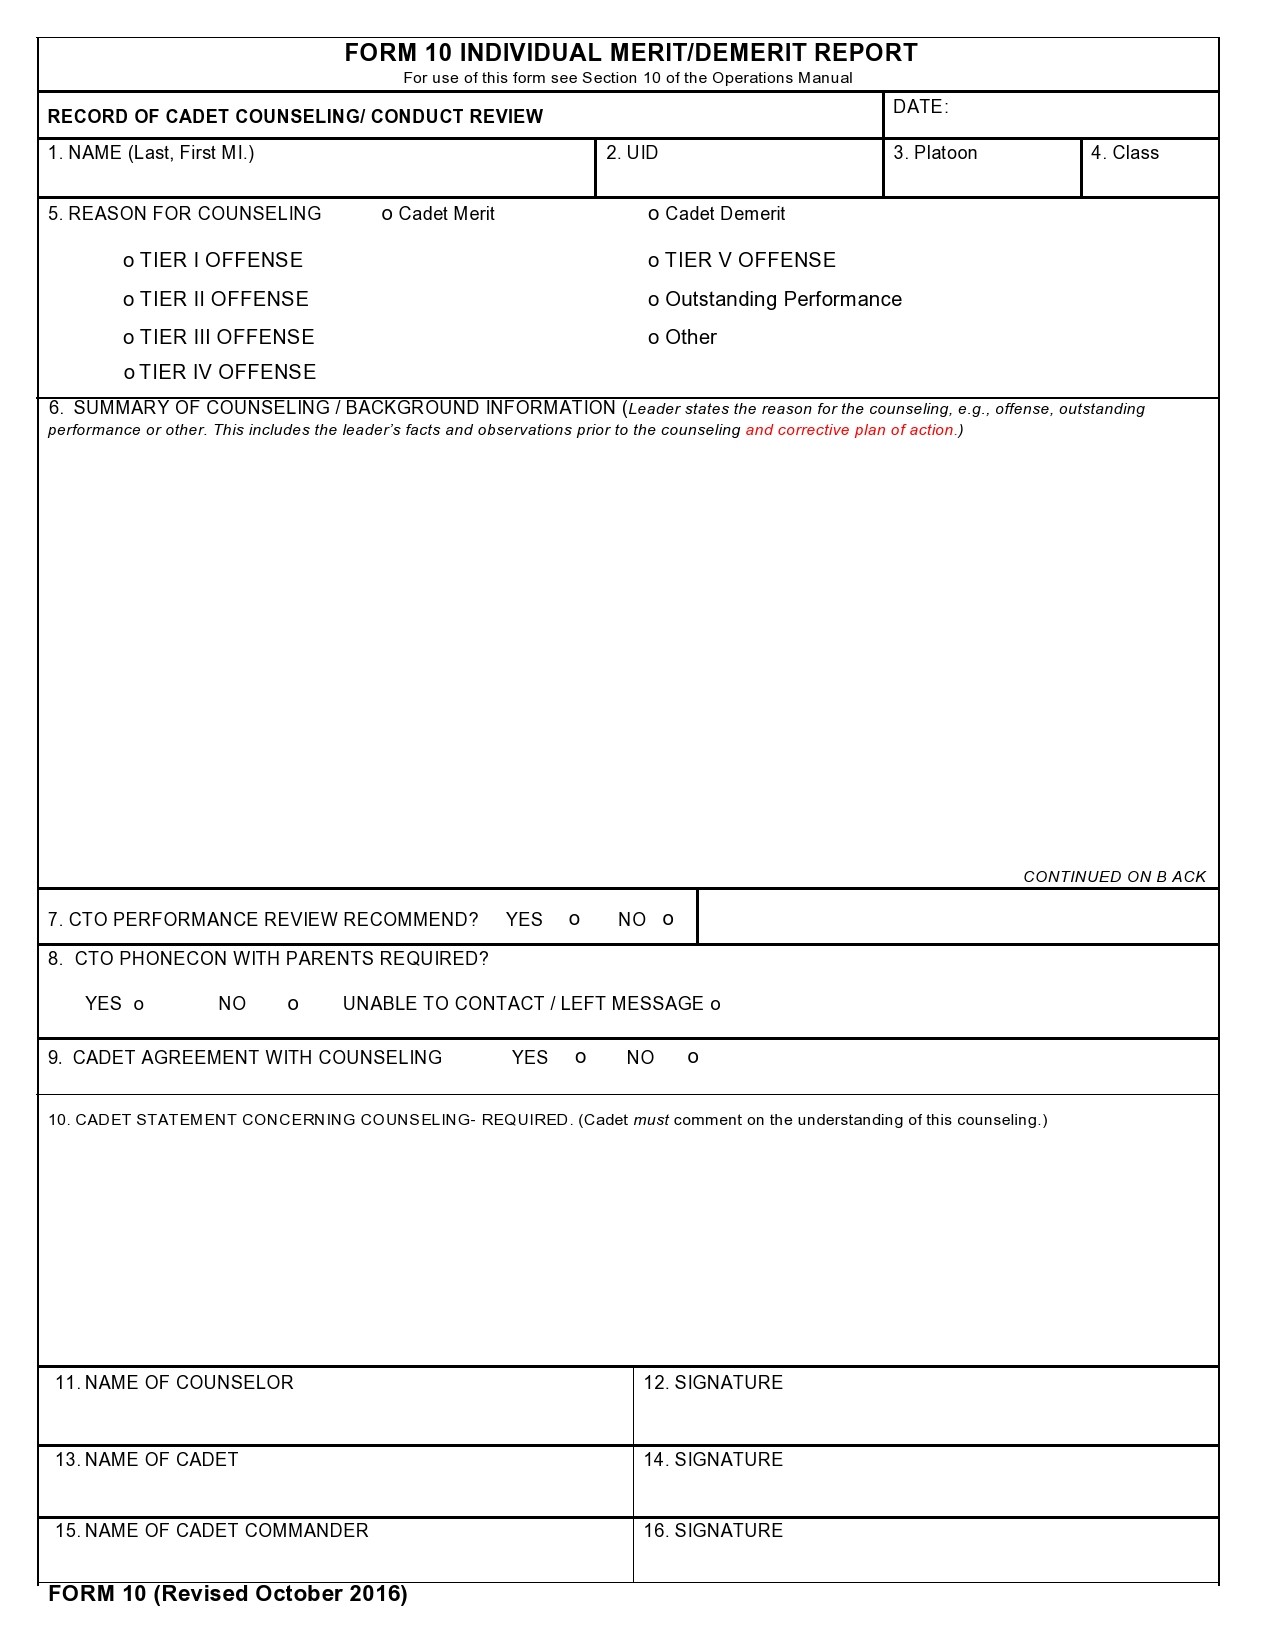 Free army counseling form 24